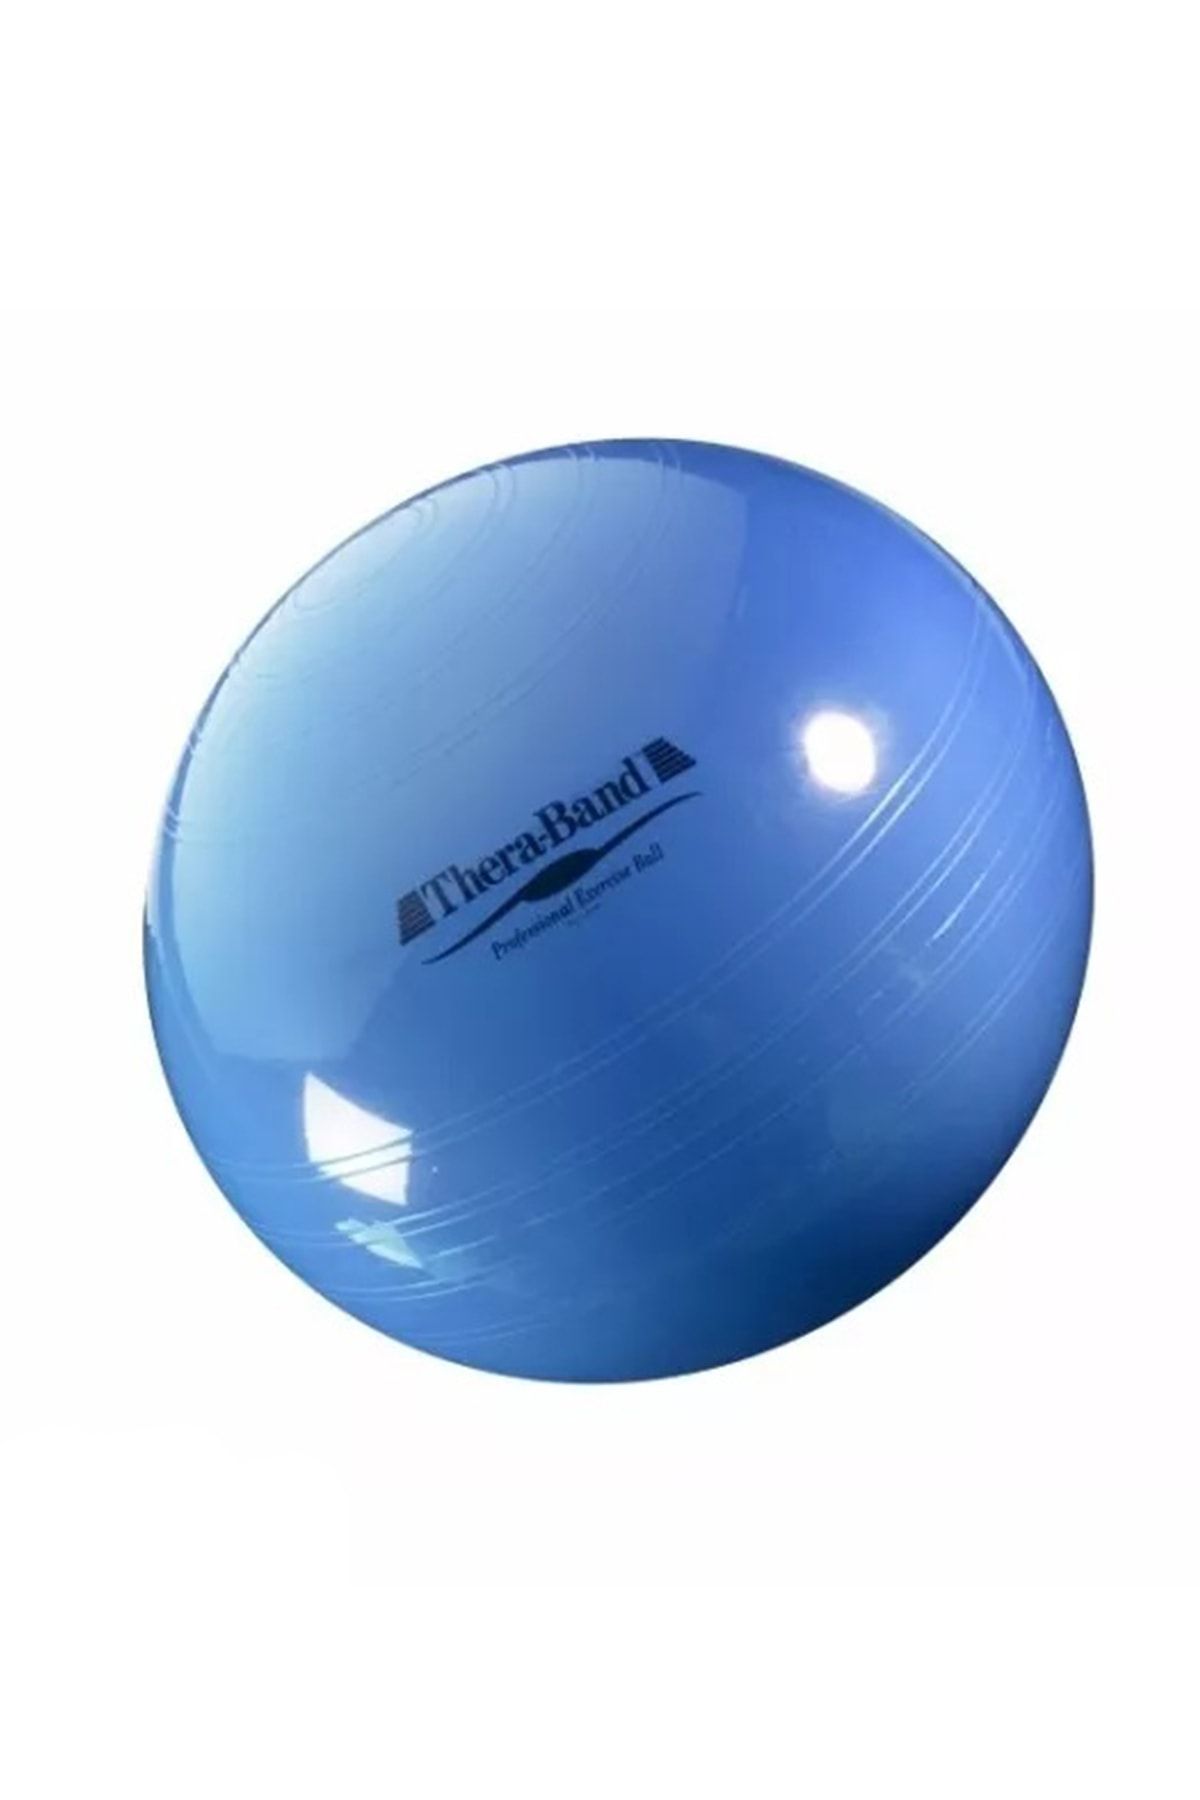 Theraband ABS BLUE 75CM EXERCISE BALL